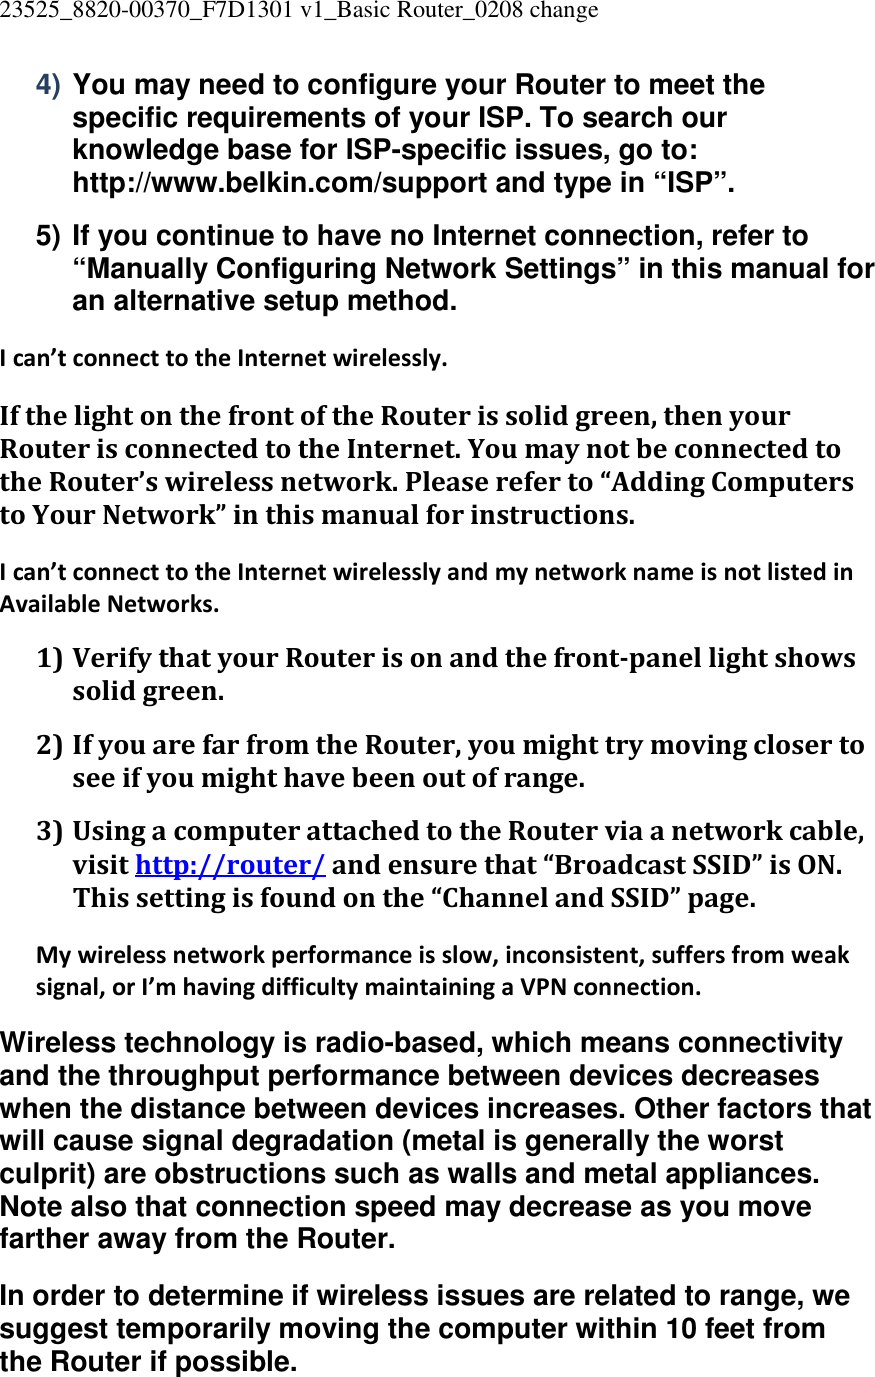 23525_8820-00370_F7D1301 v1_Basic Router_0208 change  4) You may need to configure your Router to meet the specific requirements of your ISP. To search our knowledge base for ISP-specific issues, go to: http://www.belkin.com/support and type in “ISP”. 5) If you continue to have no Internet connection, refer to “Manually Configuring Network Settings” in this manual for an alternative setup method. I can’t connect to the Internet wirelessly. If the light on the front of the Router is solid green, then your Router is connected to the Internet. You may not be connected to the Router’s wireless network. Please refer to “Adding Computers to Your Network” in this manual for instructions. I can’t connect to the Internet wirelessly and my network name is not listed in Available Networks. 1) Verify that your Router is on and the front-panel light shows solid green. 2) If you are far from the Router, you might try moving closer to see if you might have been out of range. 3) Using a computer attached to the Router via a network cable, visit http://router/ and ensure that “Broadcast SSID” is ON. This setting is found on the “Channel and SSID” page. My wireless network performance is slow, inconsistent, suffers from weak signal, or I’m having difficulty maintaining a VPN connection. Wireless technology is radio-based, which means connectivity and the throughput performance between devices decreases when the distance between devices increases. Other factors that will cause signal degradation (metal is generally the worst culprit) are obstructions such as walls and metal appliances. Note also that connection speed may decrease as you move farther away from the Router. In order to determine if wireless issues are related to range, we suggest temporarily moving the computer within 10 feet from the Router if possible. 